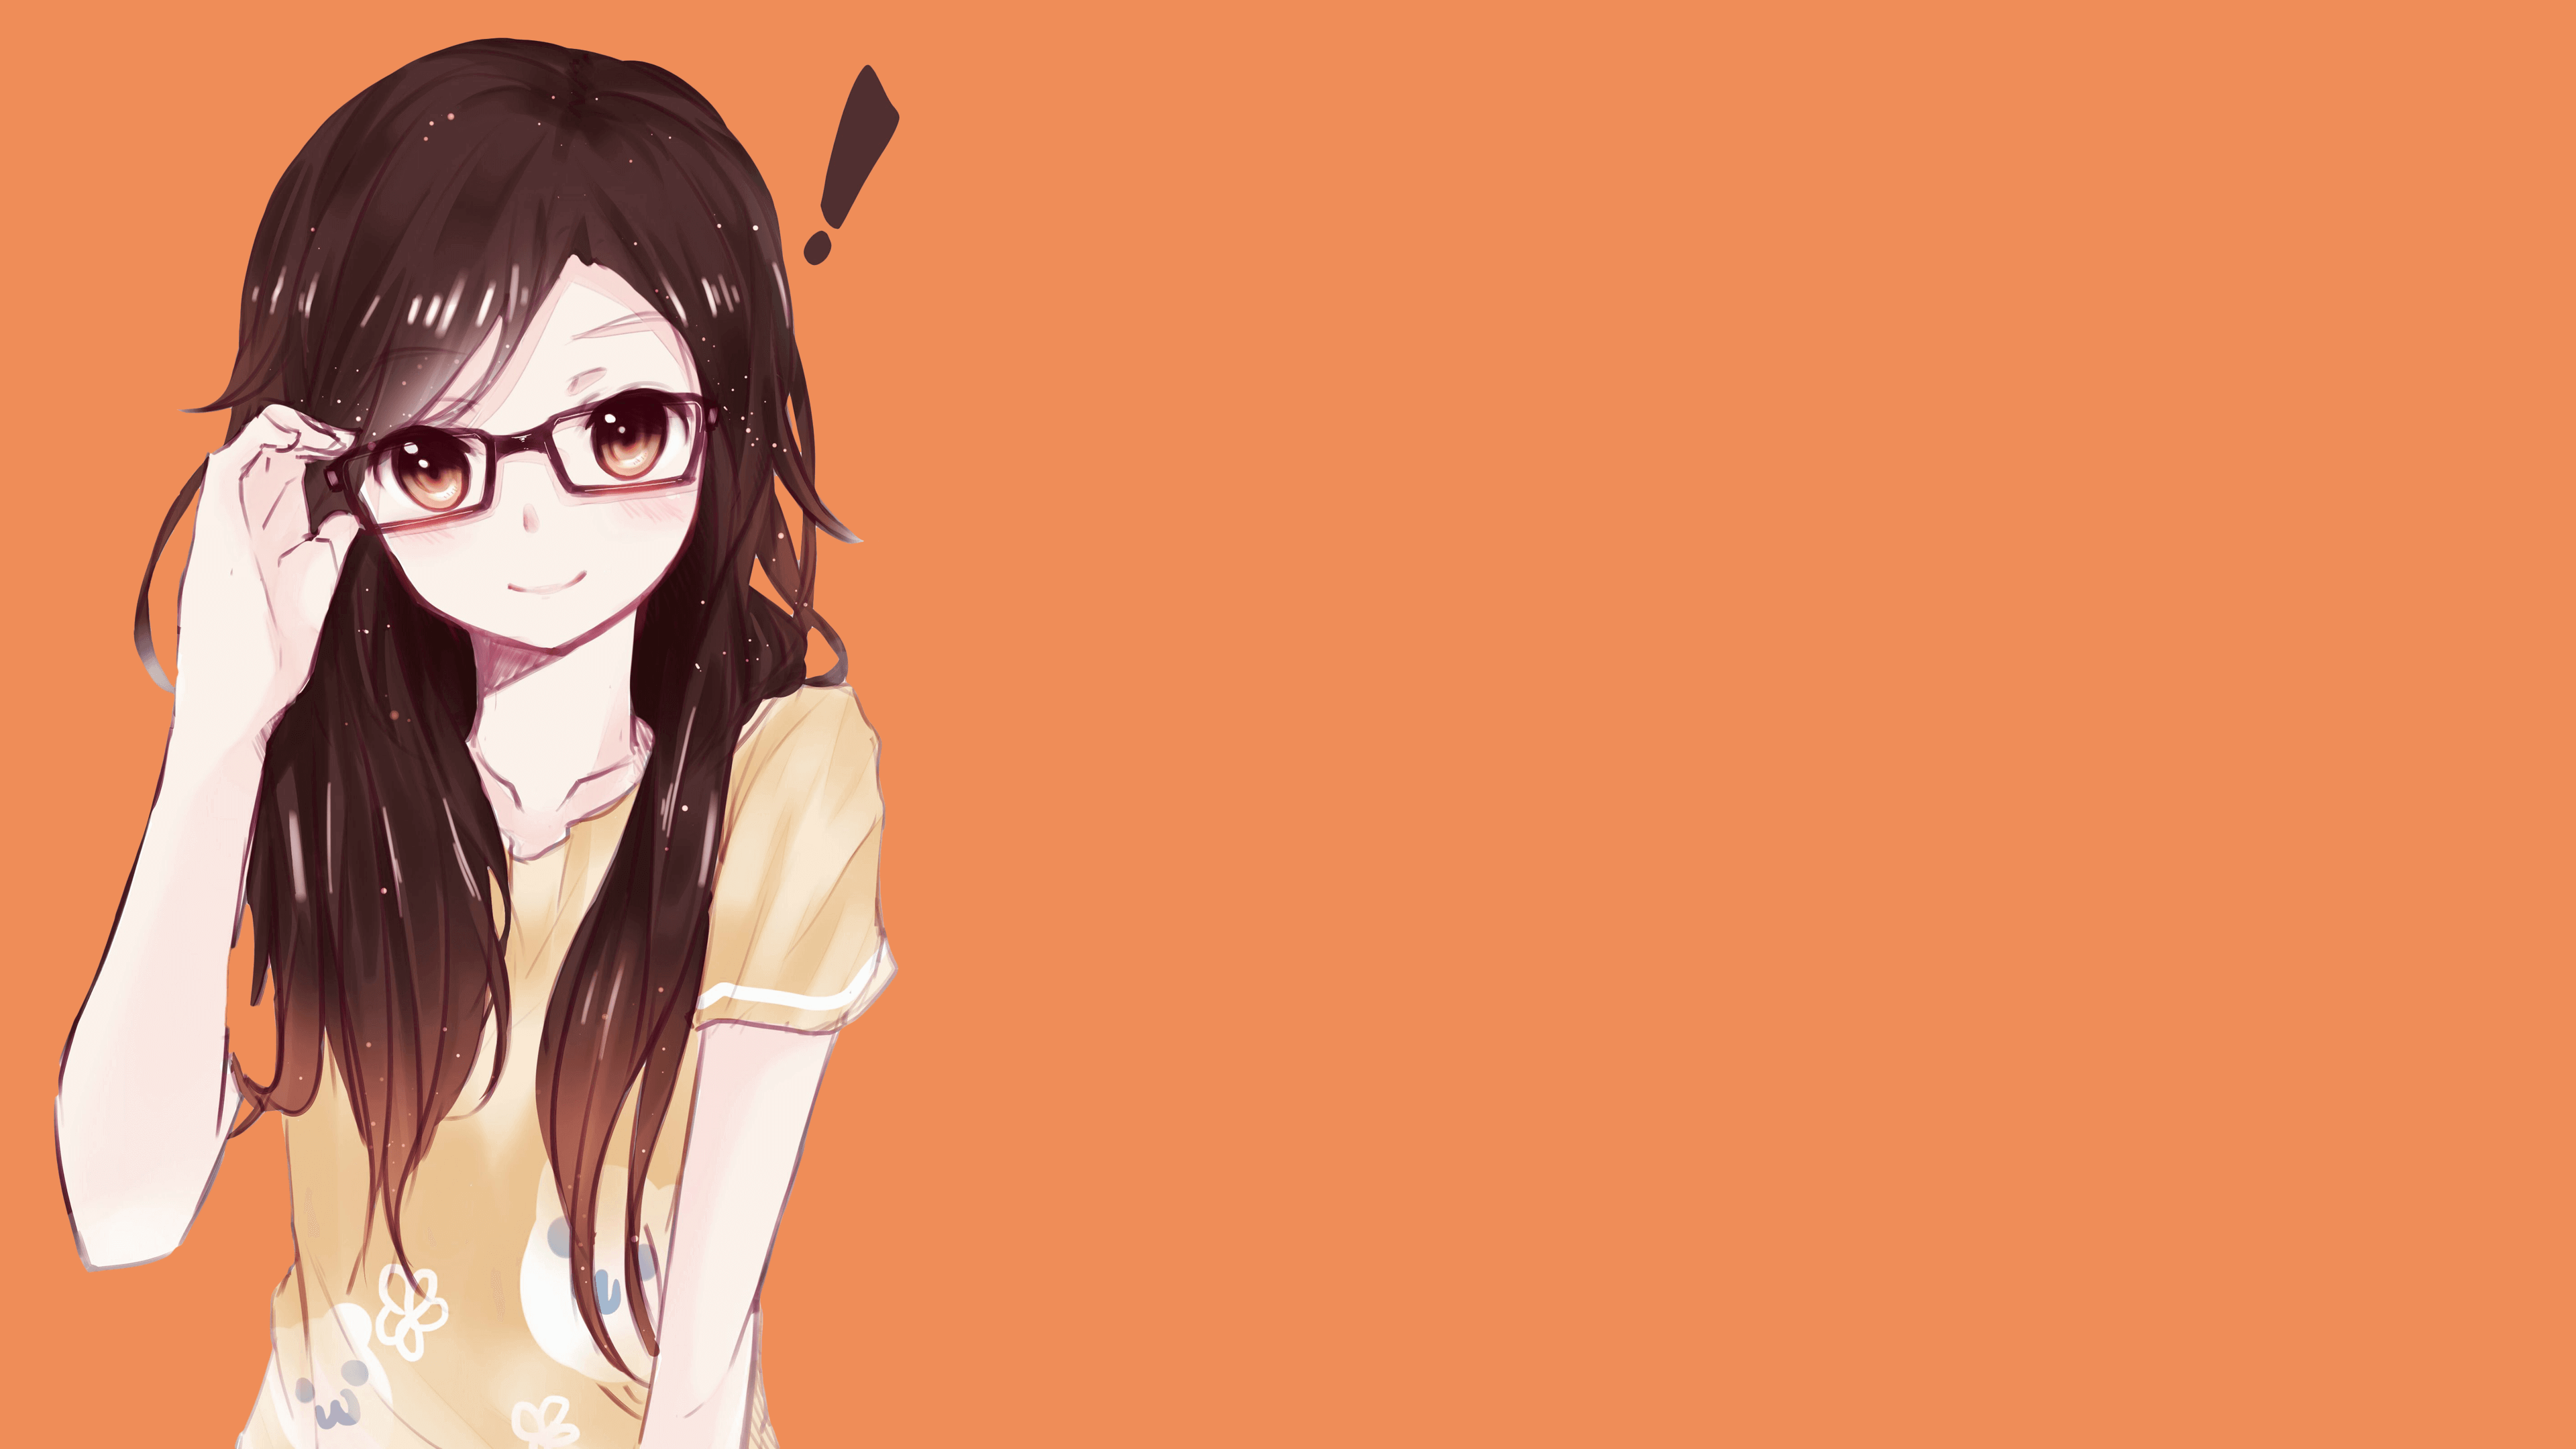 Anime Girls 4k PC Wallpapers - Wallpaper Cave